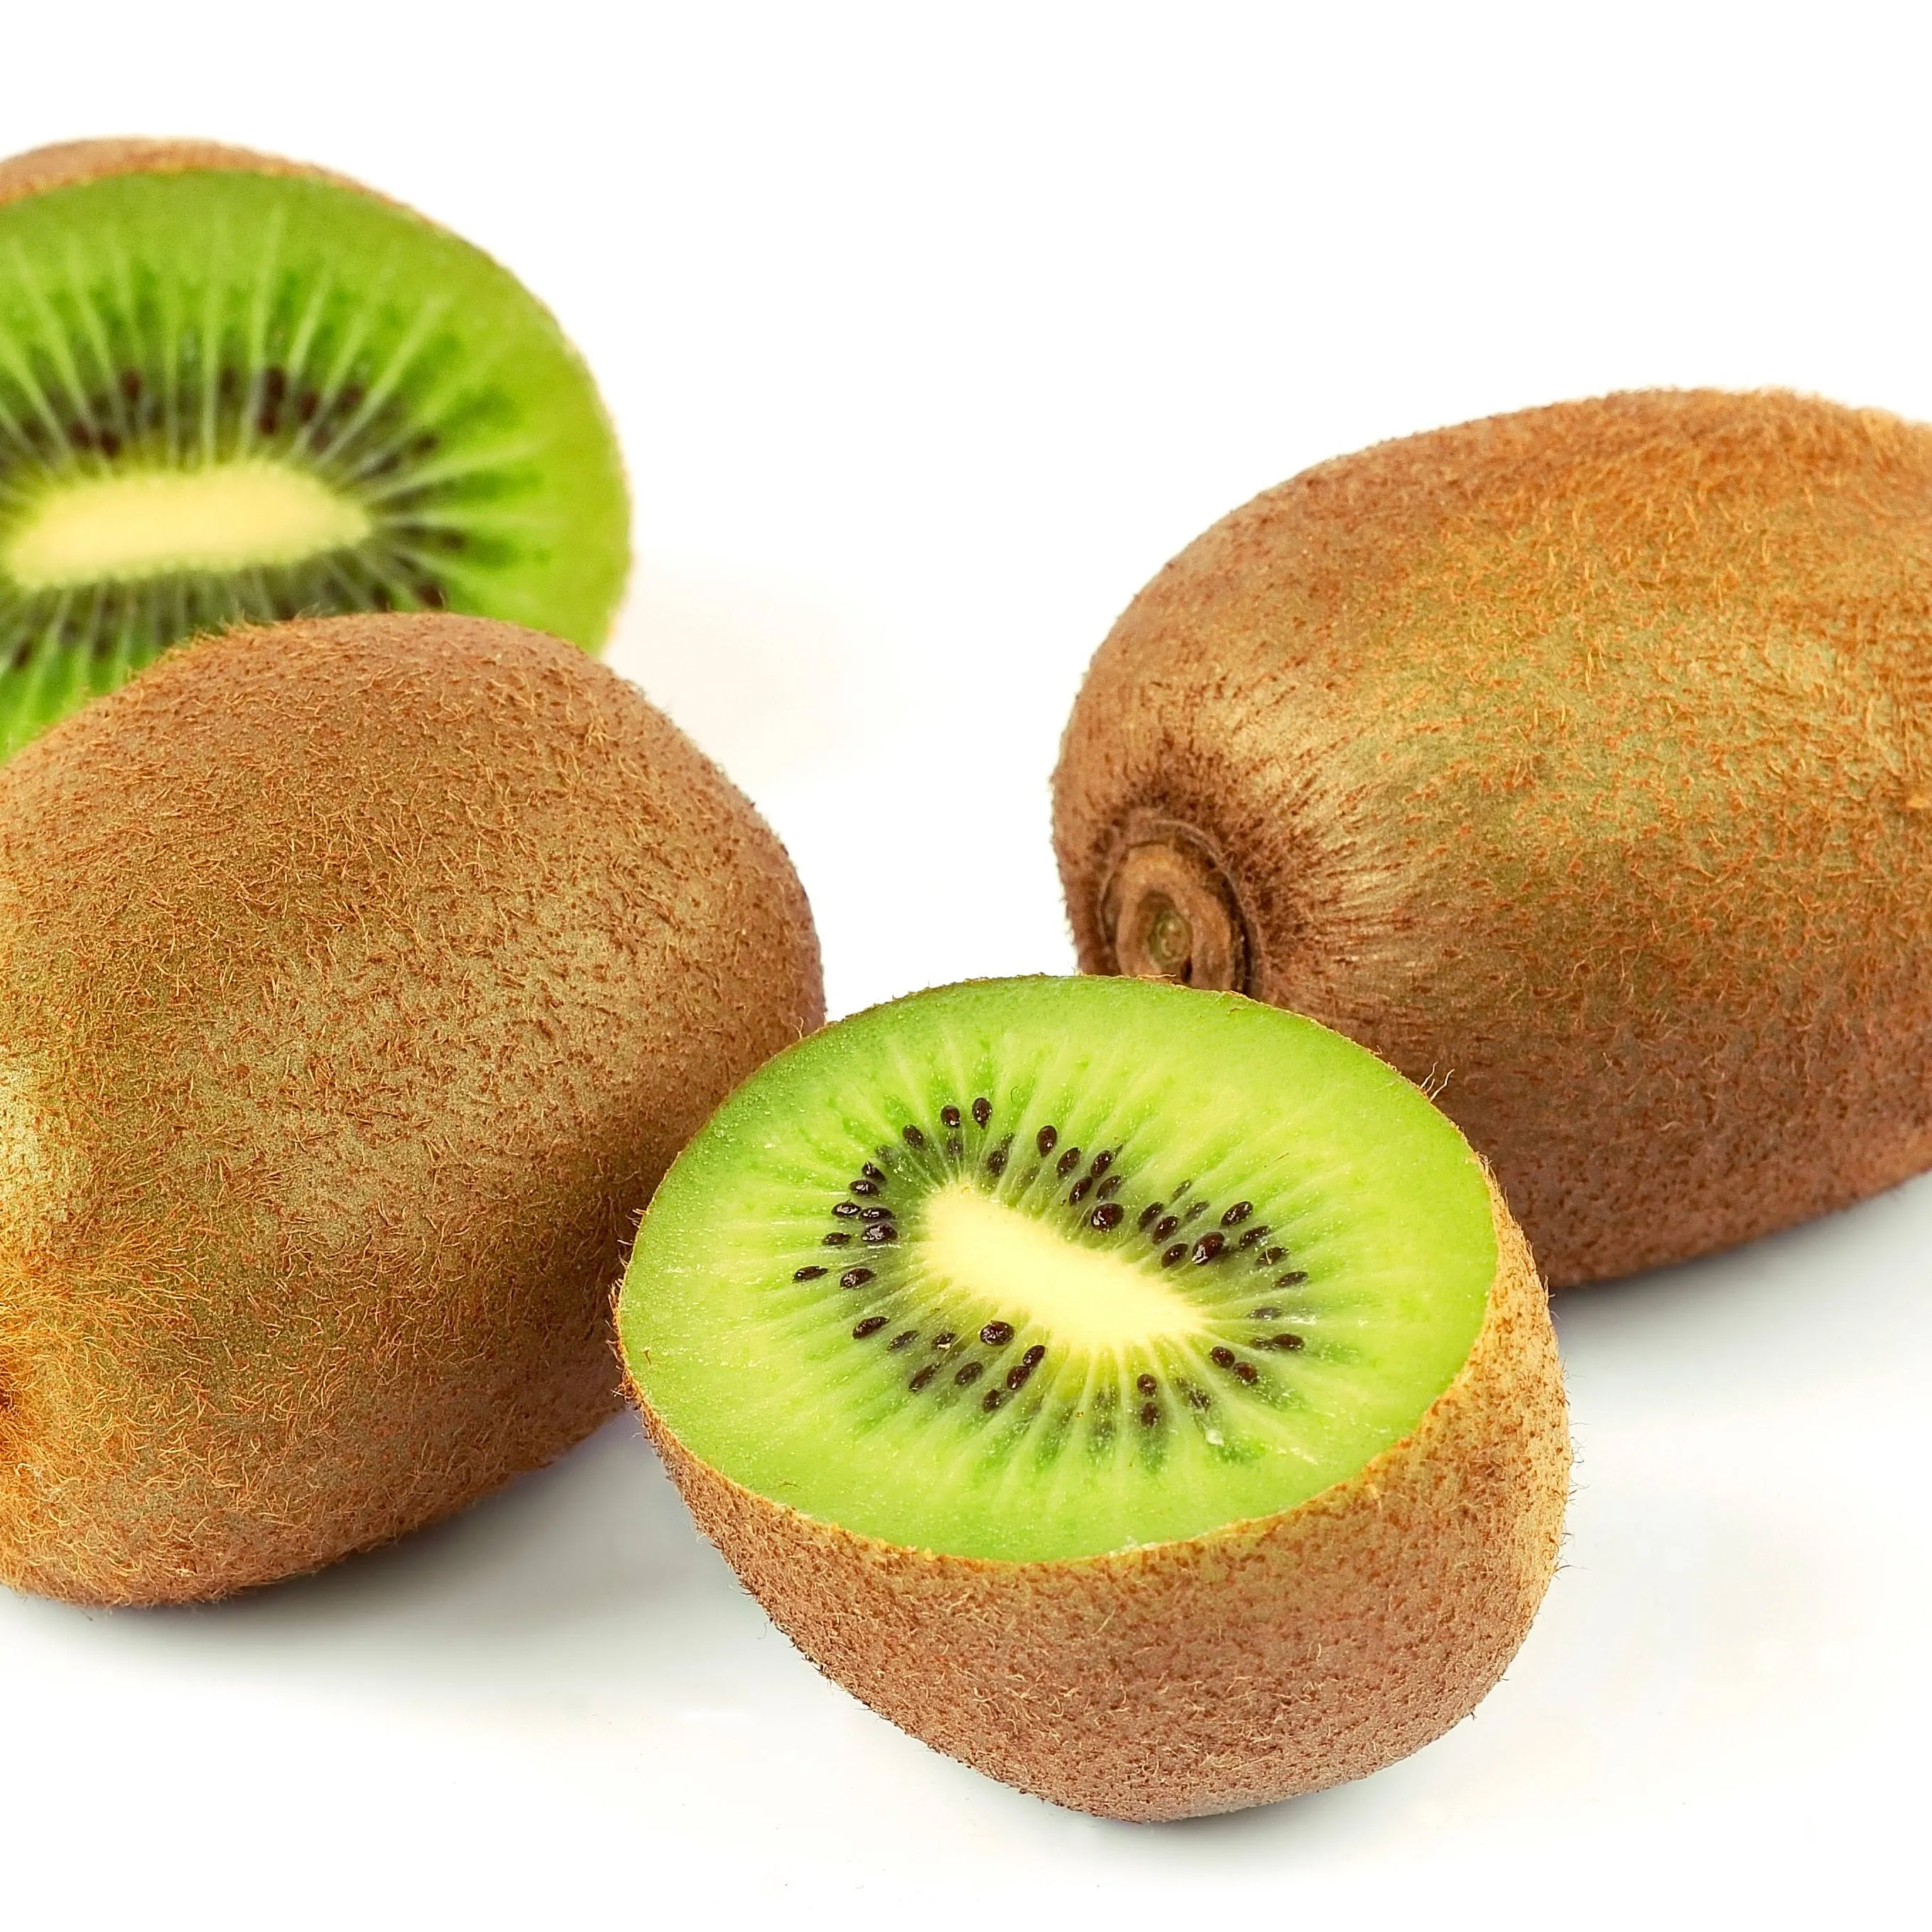 kiwi fruit types + purchase price, use, uses and properties